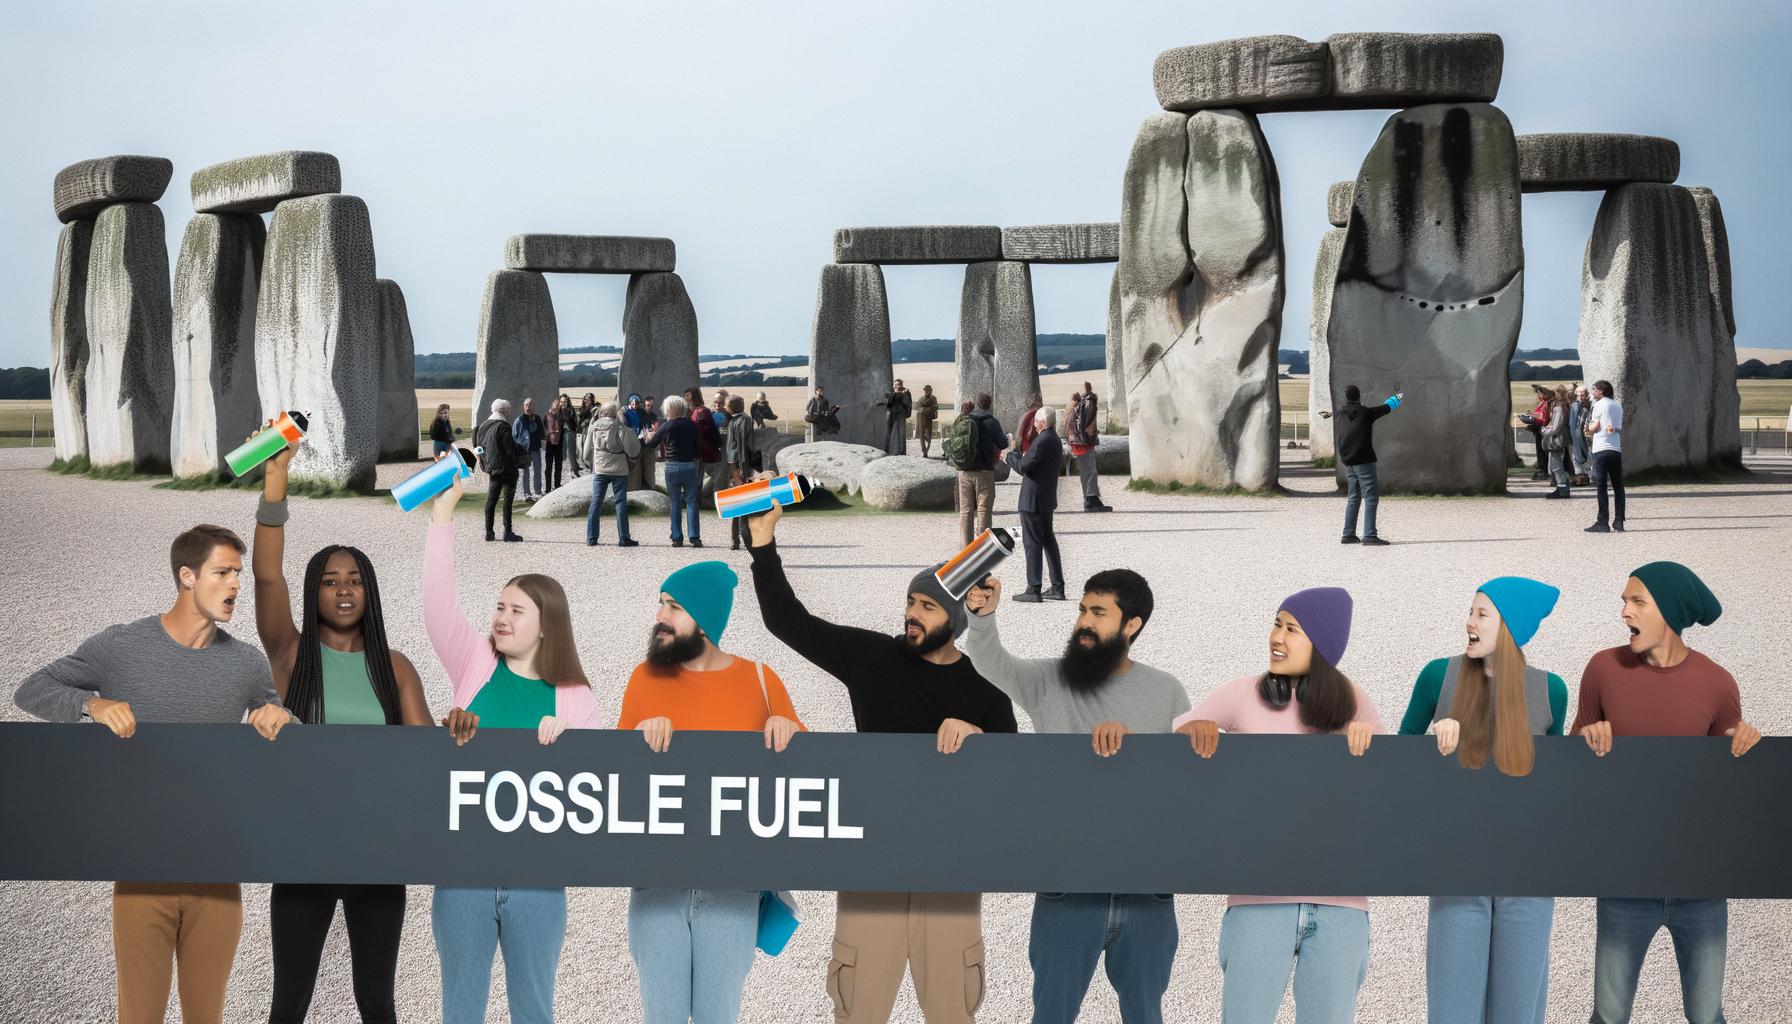 Protesters spray Stonehenge to demand fossil fuel phase-out